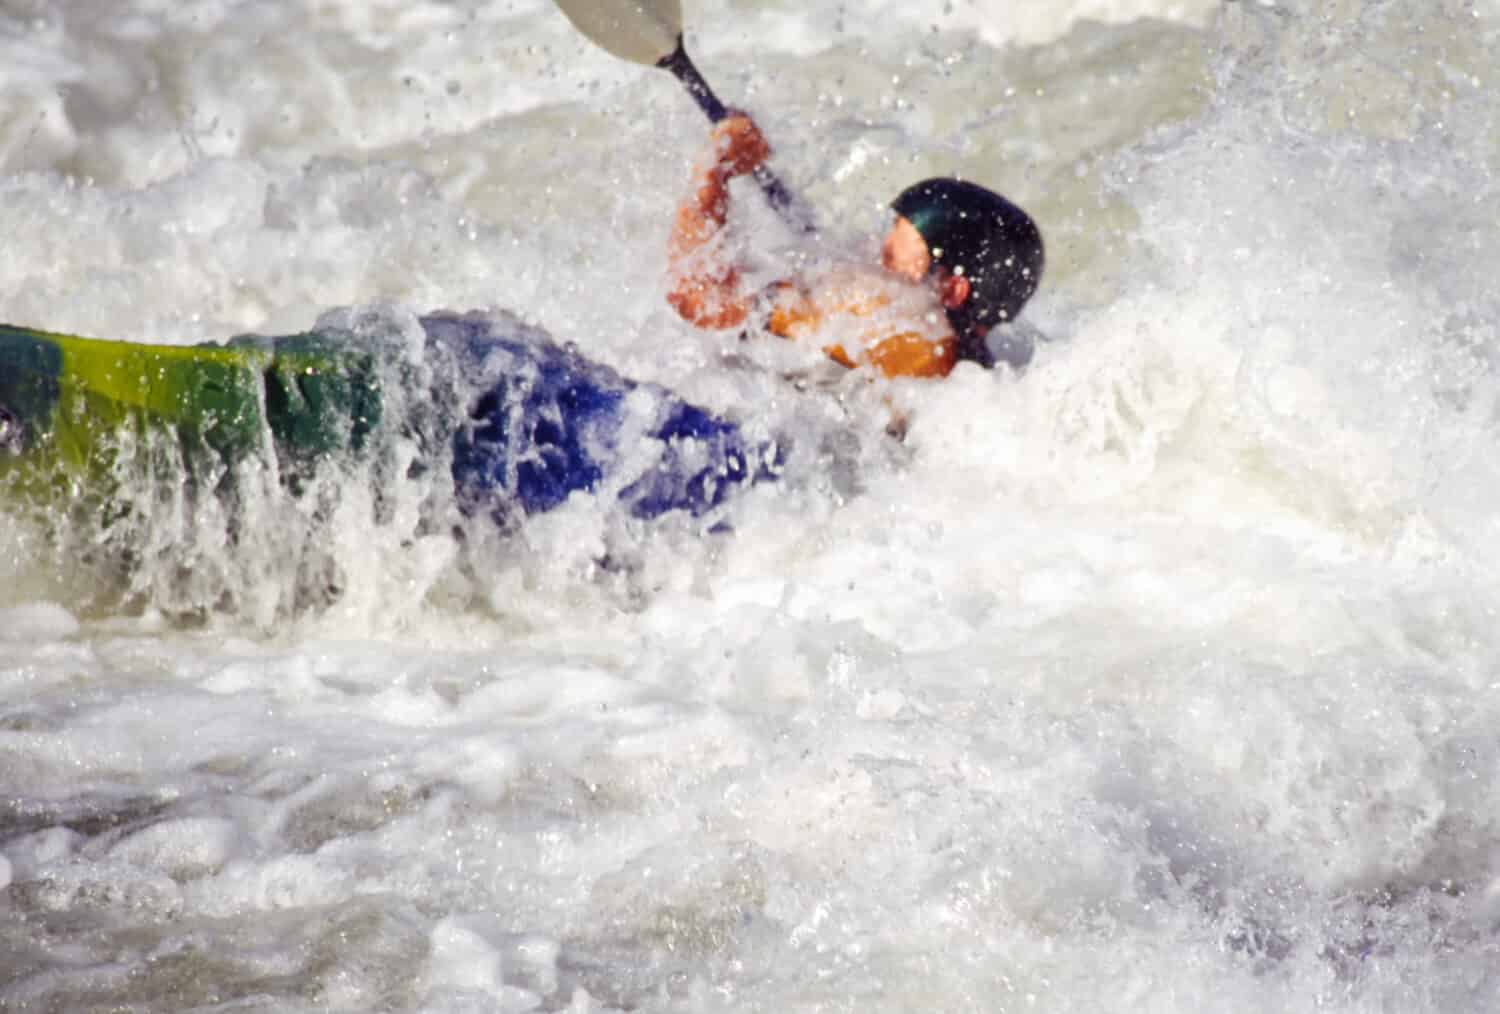 USA, South Carolina, Chattooga National Wild and Scenic River on the GA/SC border, kayaker in Bull Sluice Rapids